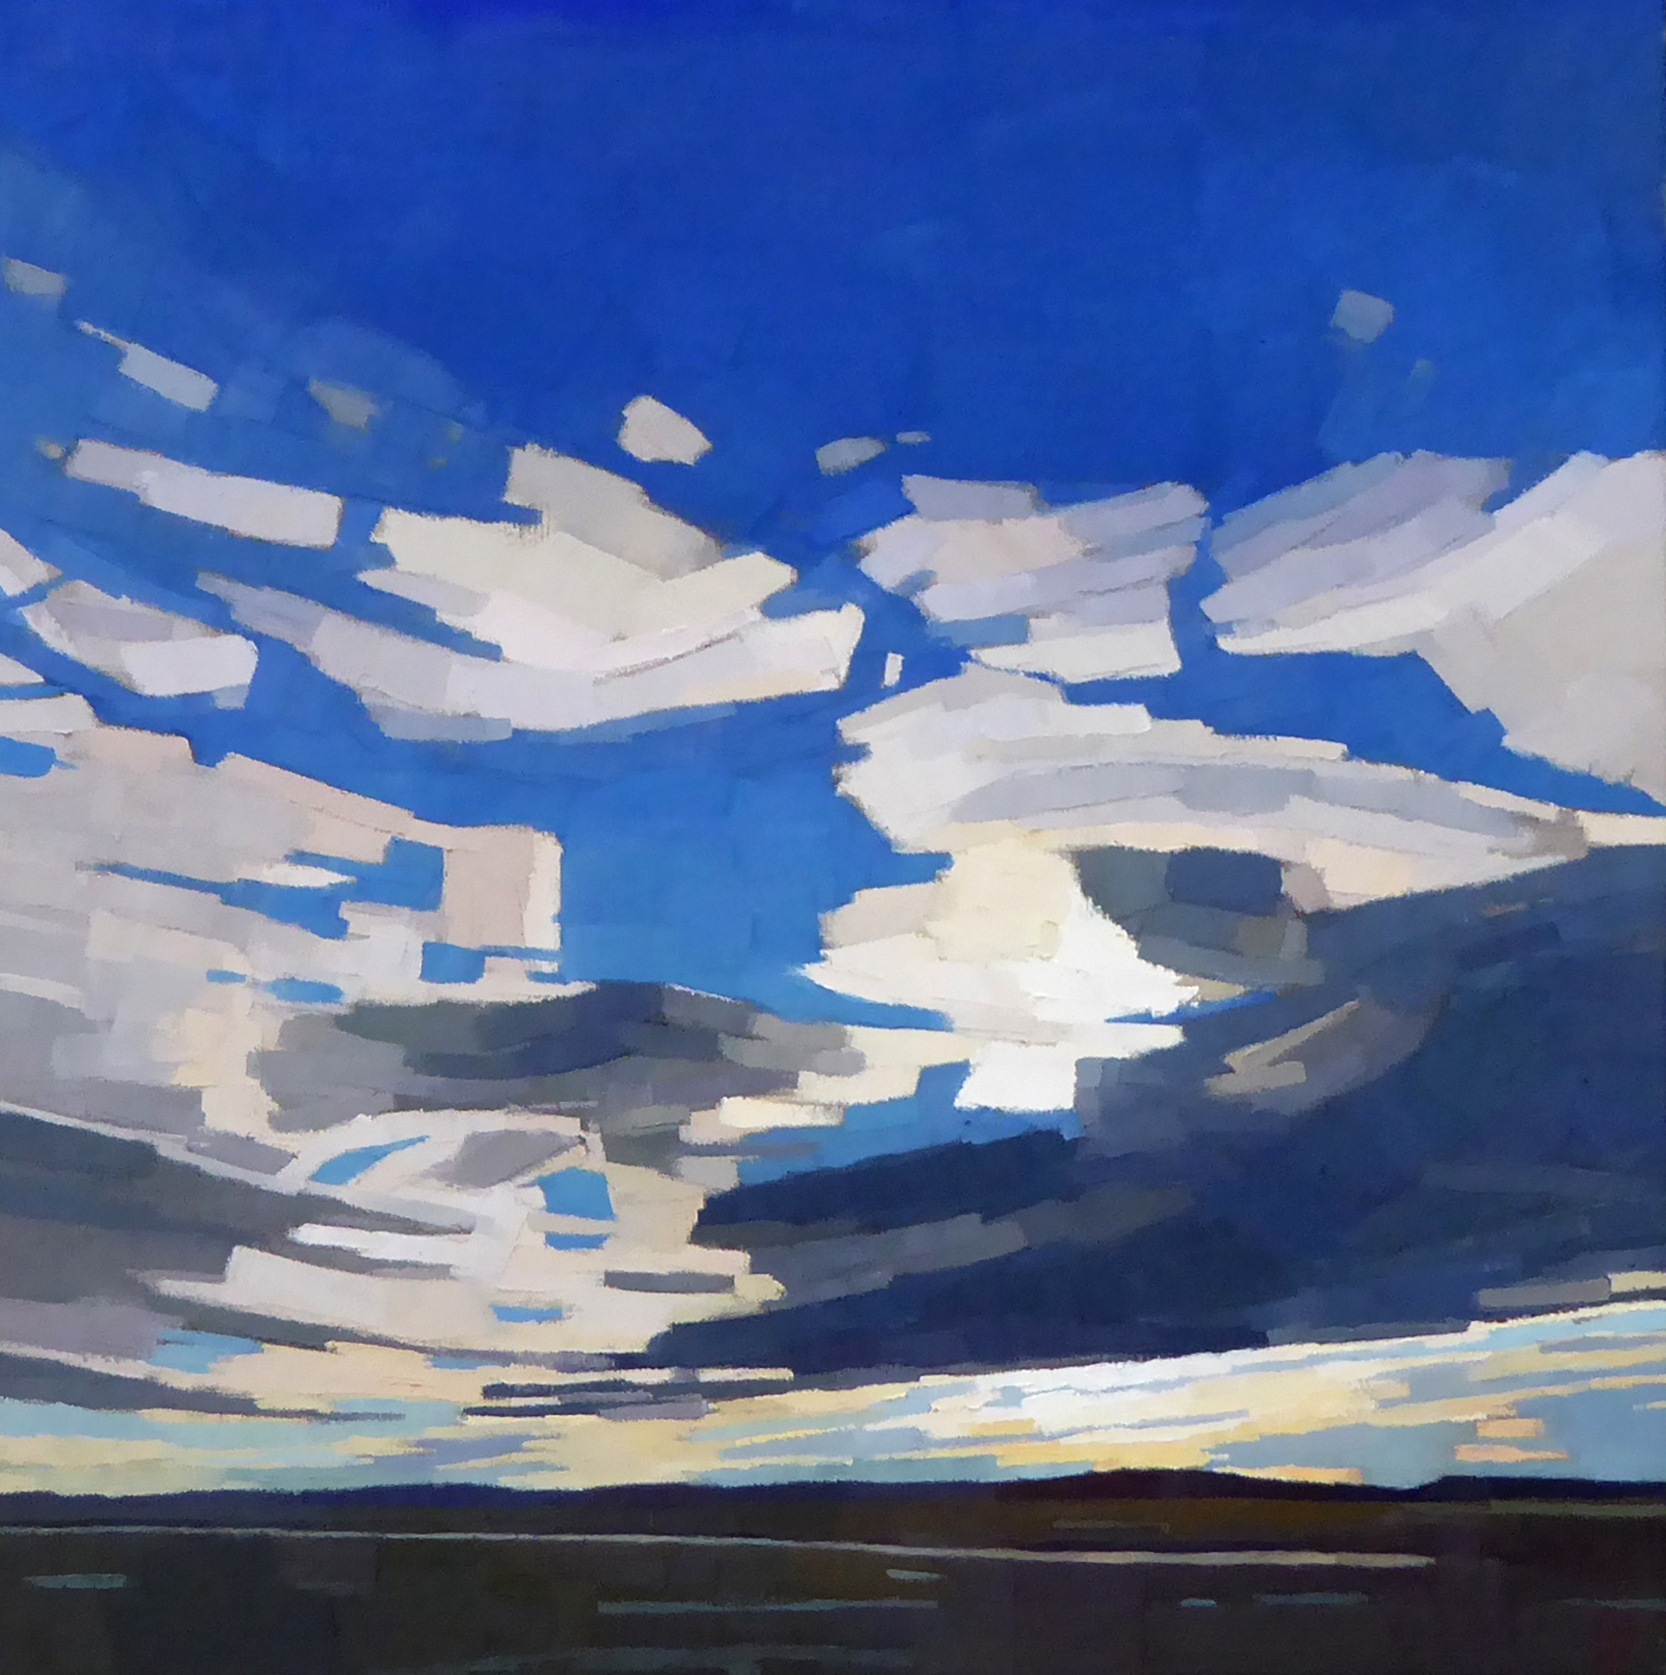   So Blue  26 x 26 oil on linen  sold  Powers Gallery Acton, MA 